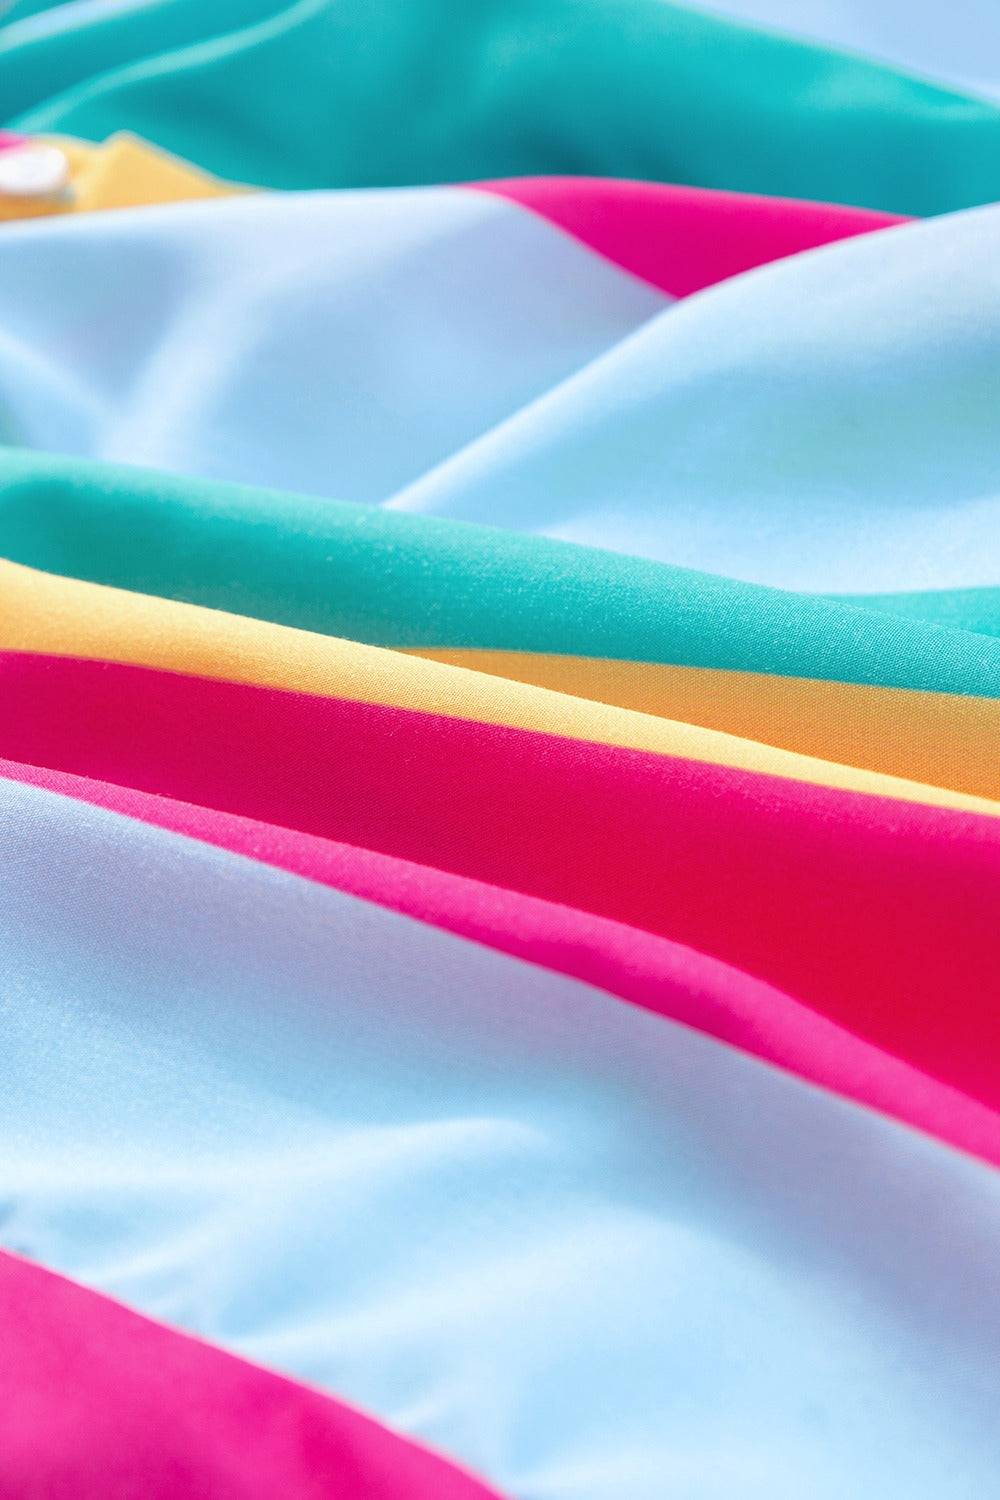 a close up of a multicolored sheet with a toothbrush in it